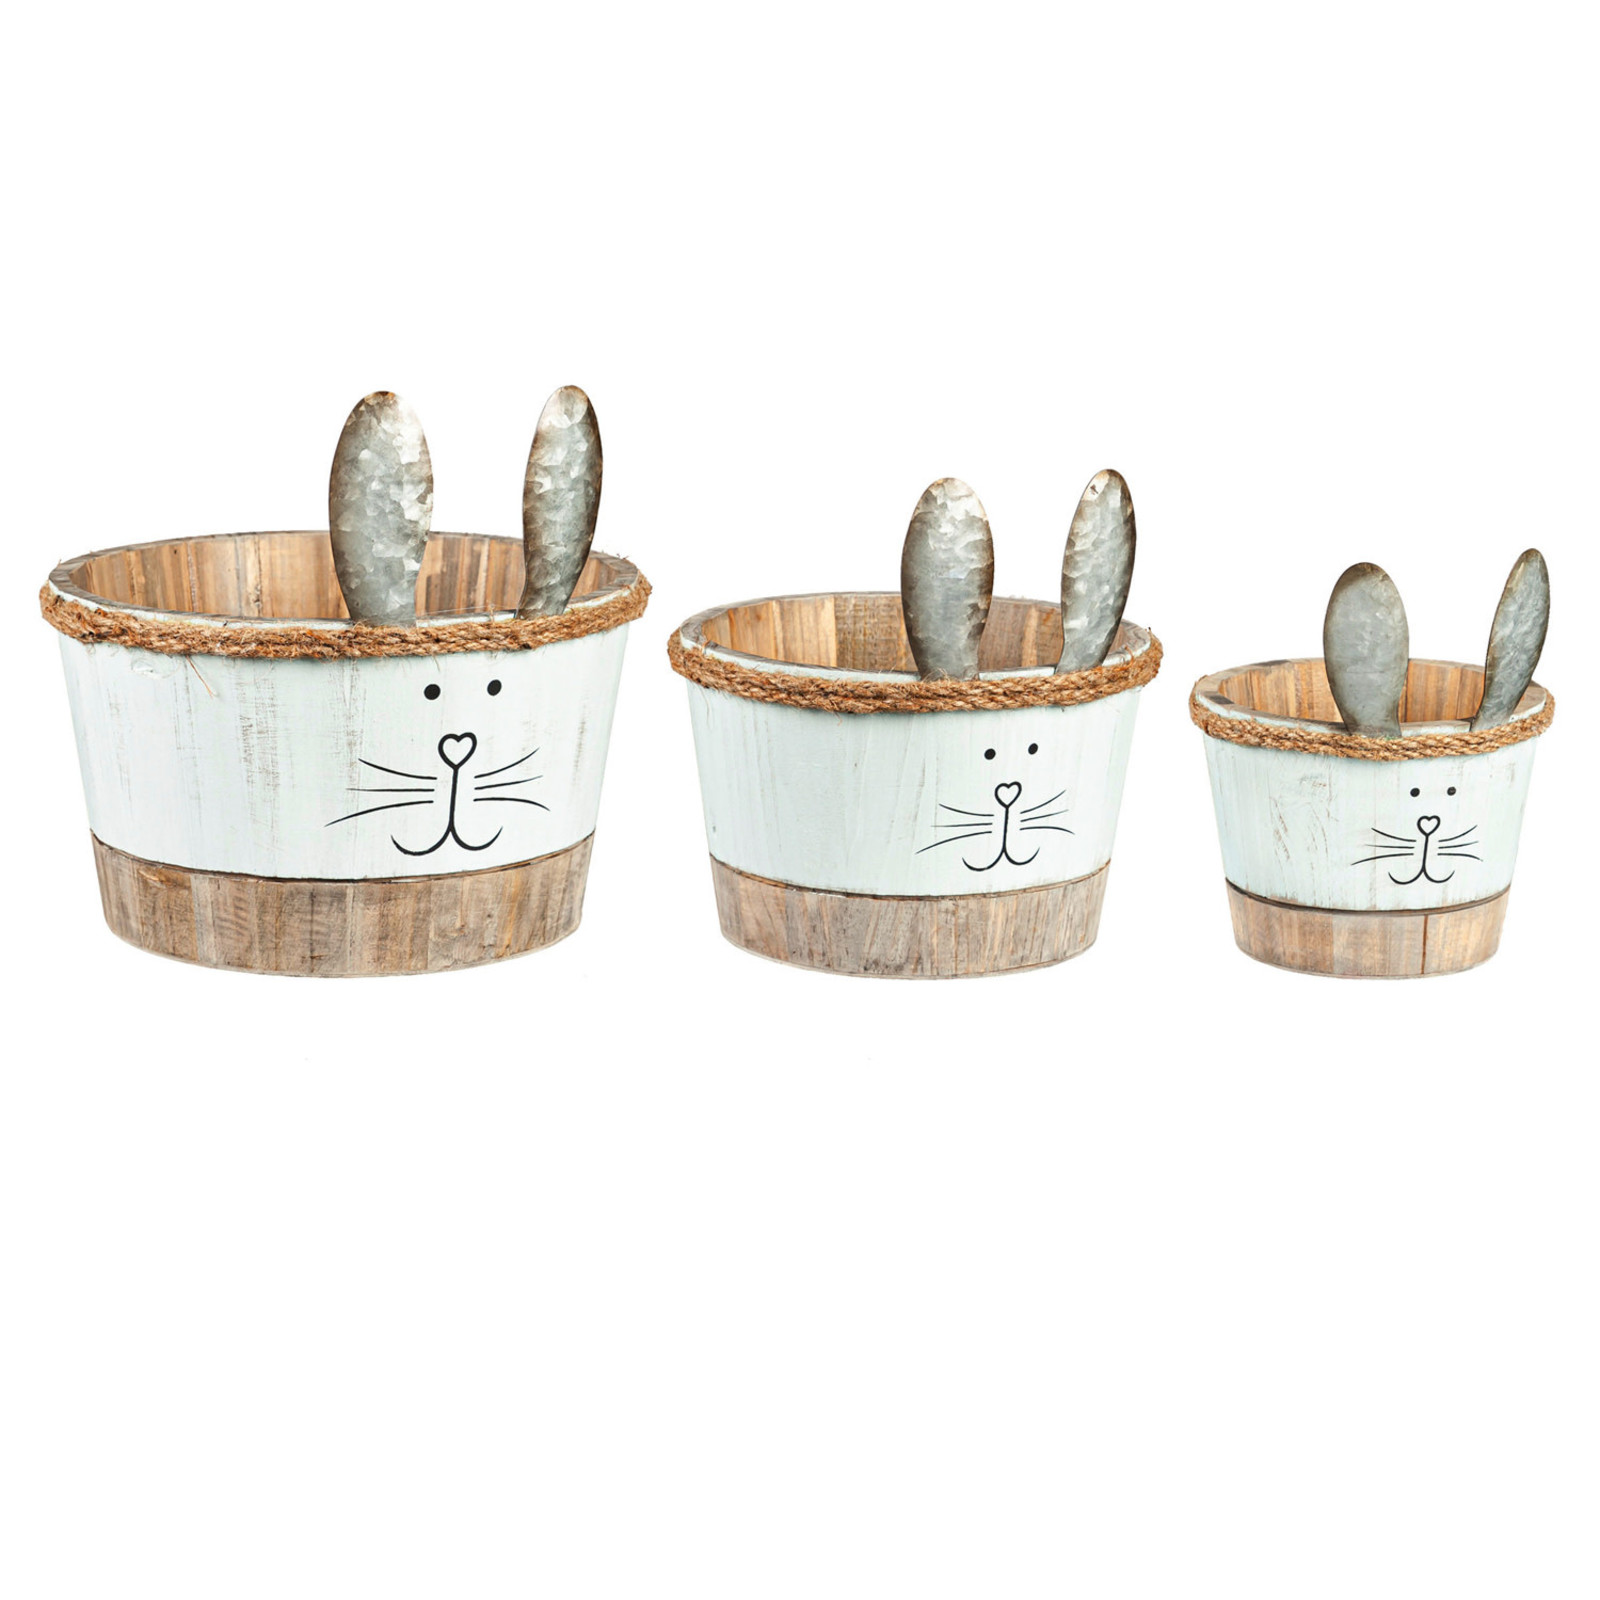 Evergreen Enterprises Wood Bunny Planter Large  with Metal Ears    8PMTL5325L loading=